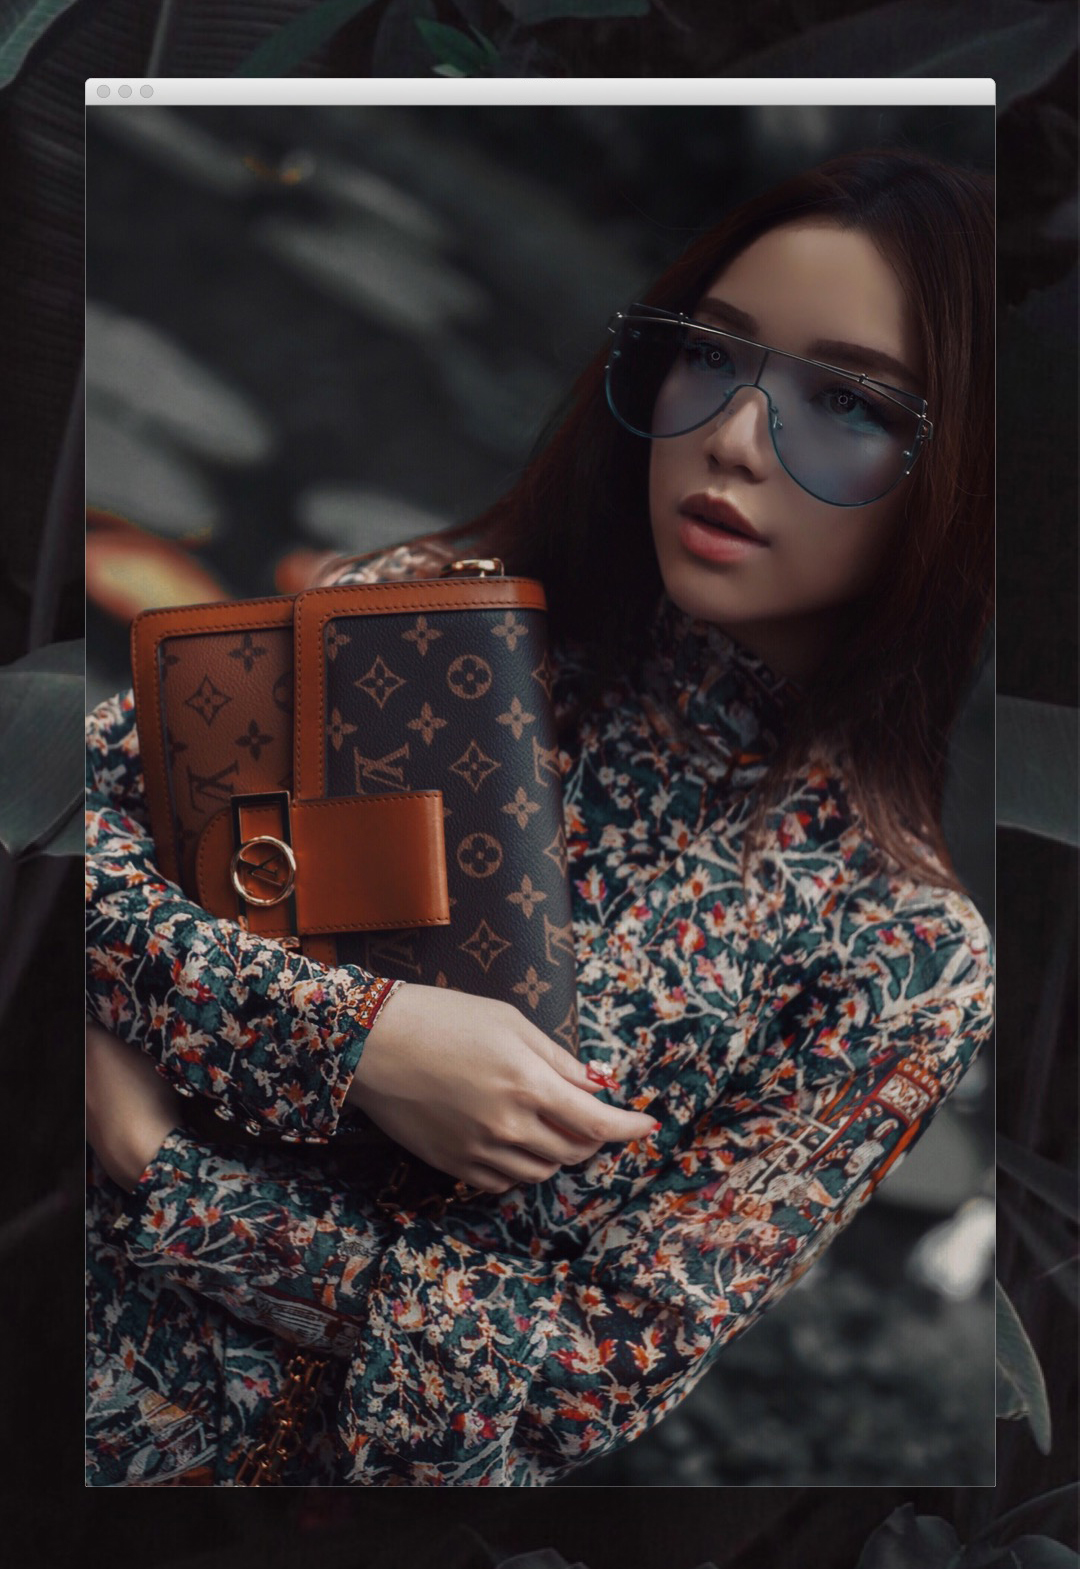 39 Outfits with dauphine ideas  dauphine, louis vuitton, vuitton